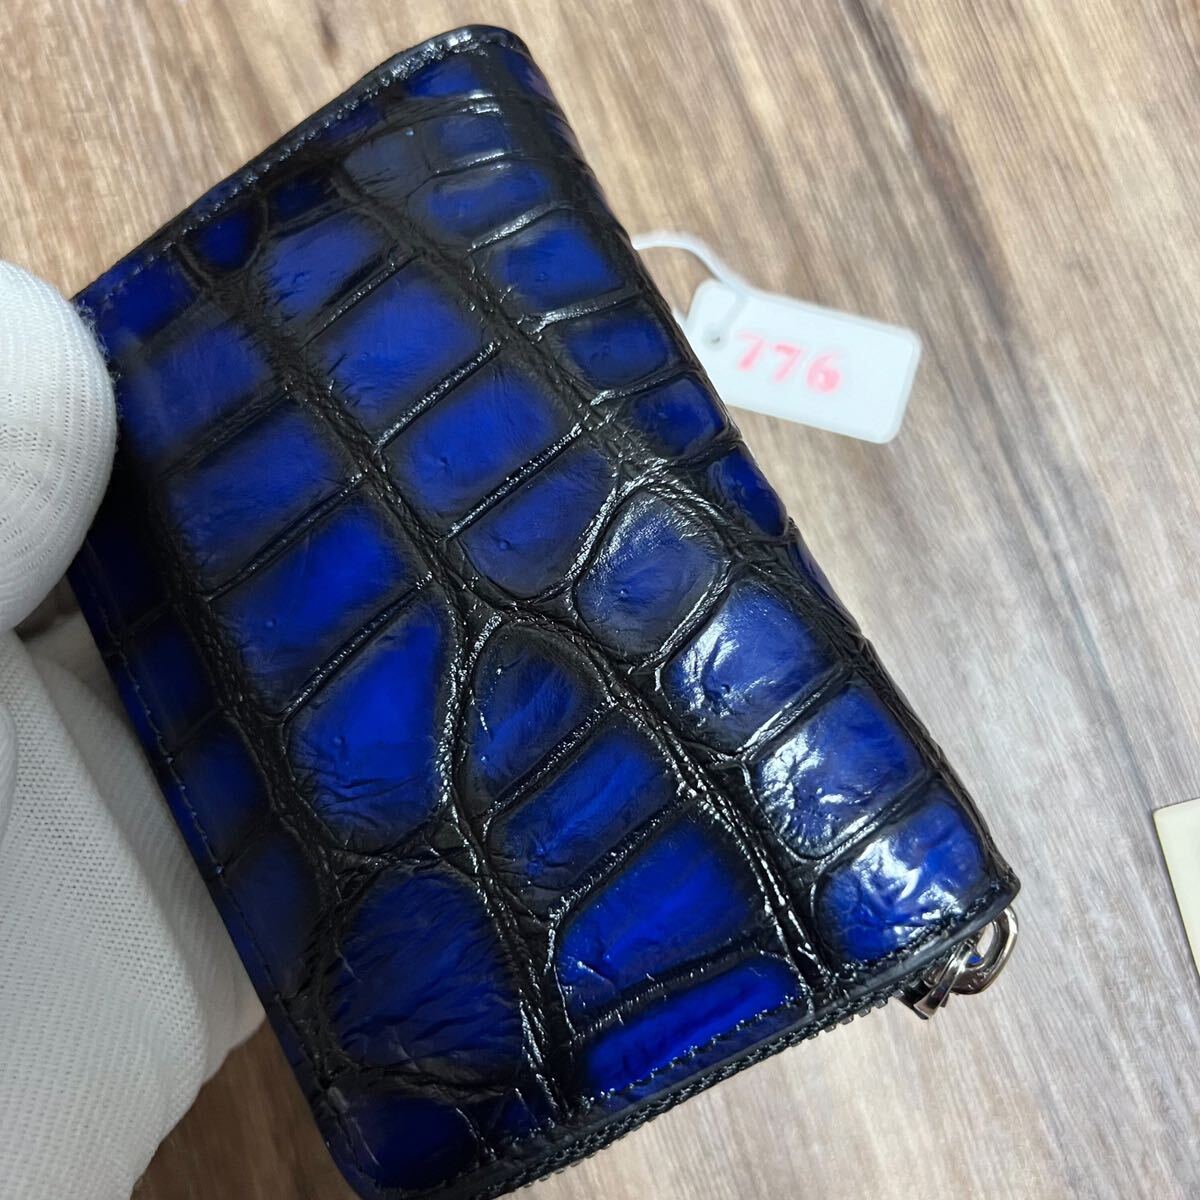  rare [ the truth thing photographing ] elegant blue crocodile men's round fastener wani. original leather hand dyeing handmade long wallet .. compact Mini purse 